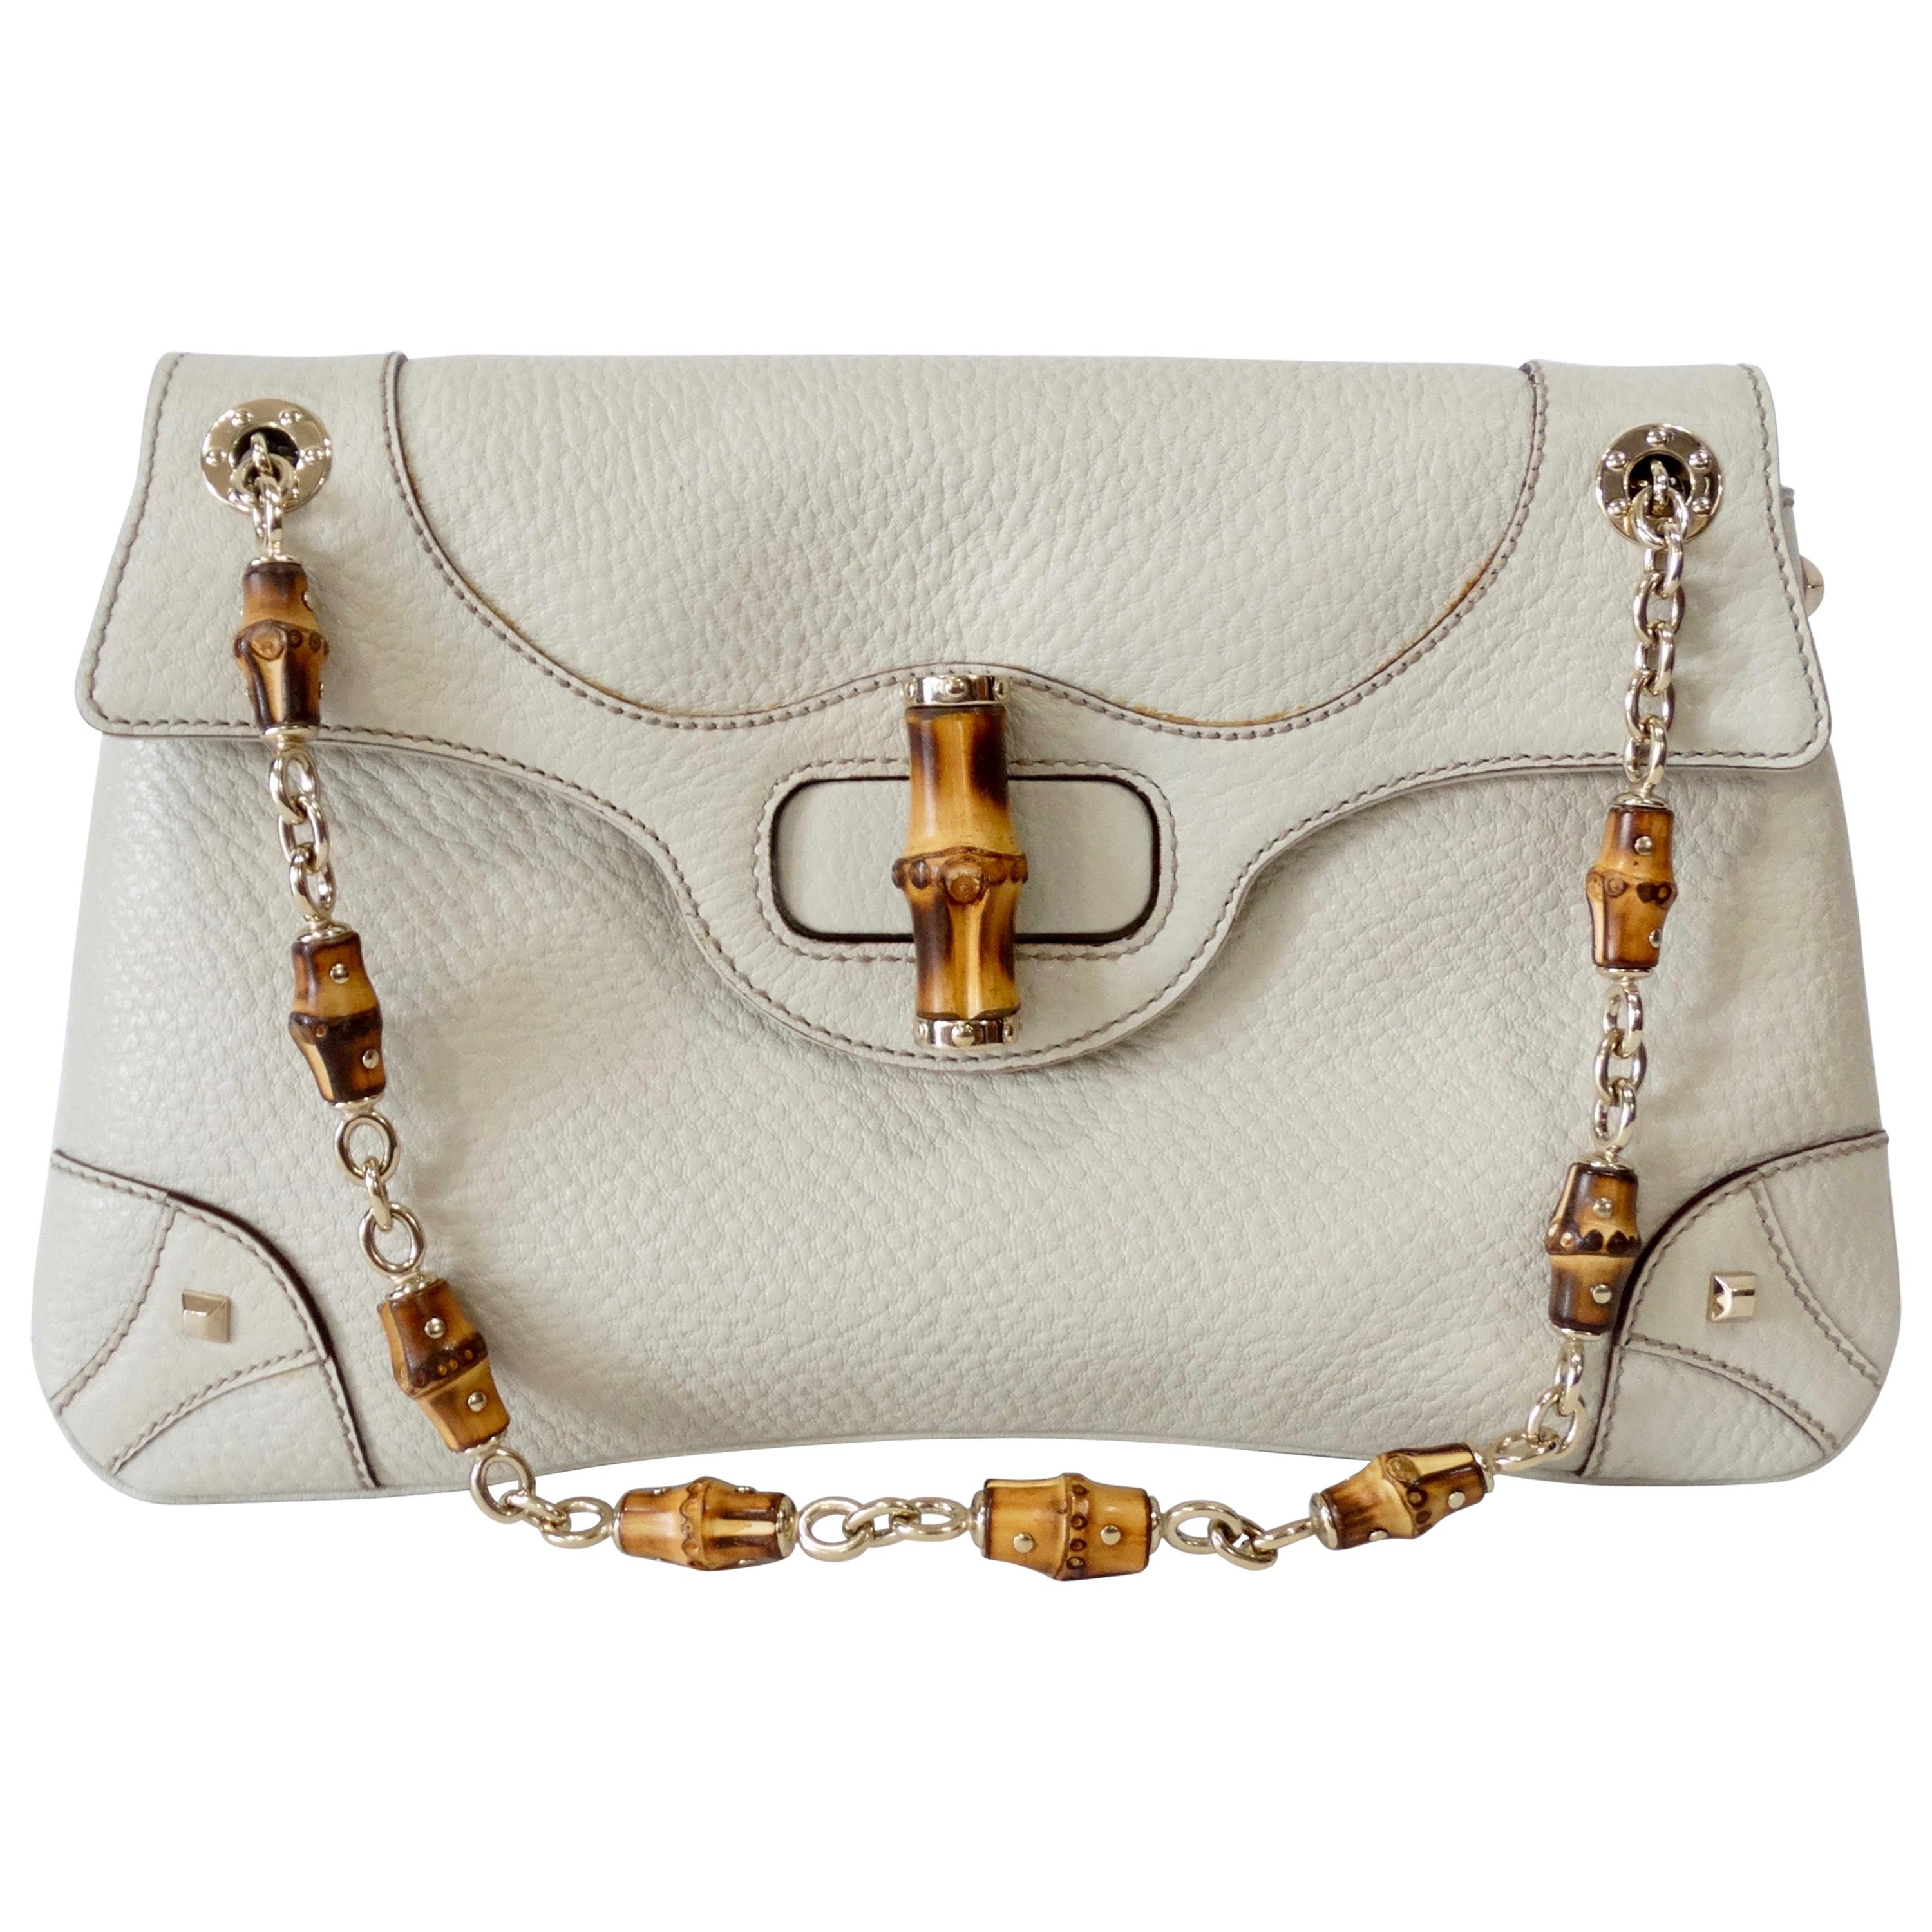 Tom Ford For Gucci 2000s Cream Pebbled Leather Bamboo Shoulder Bag